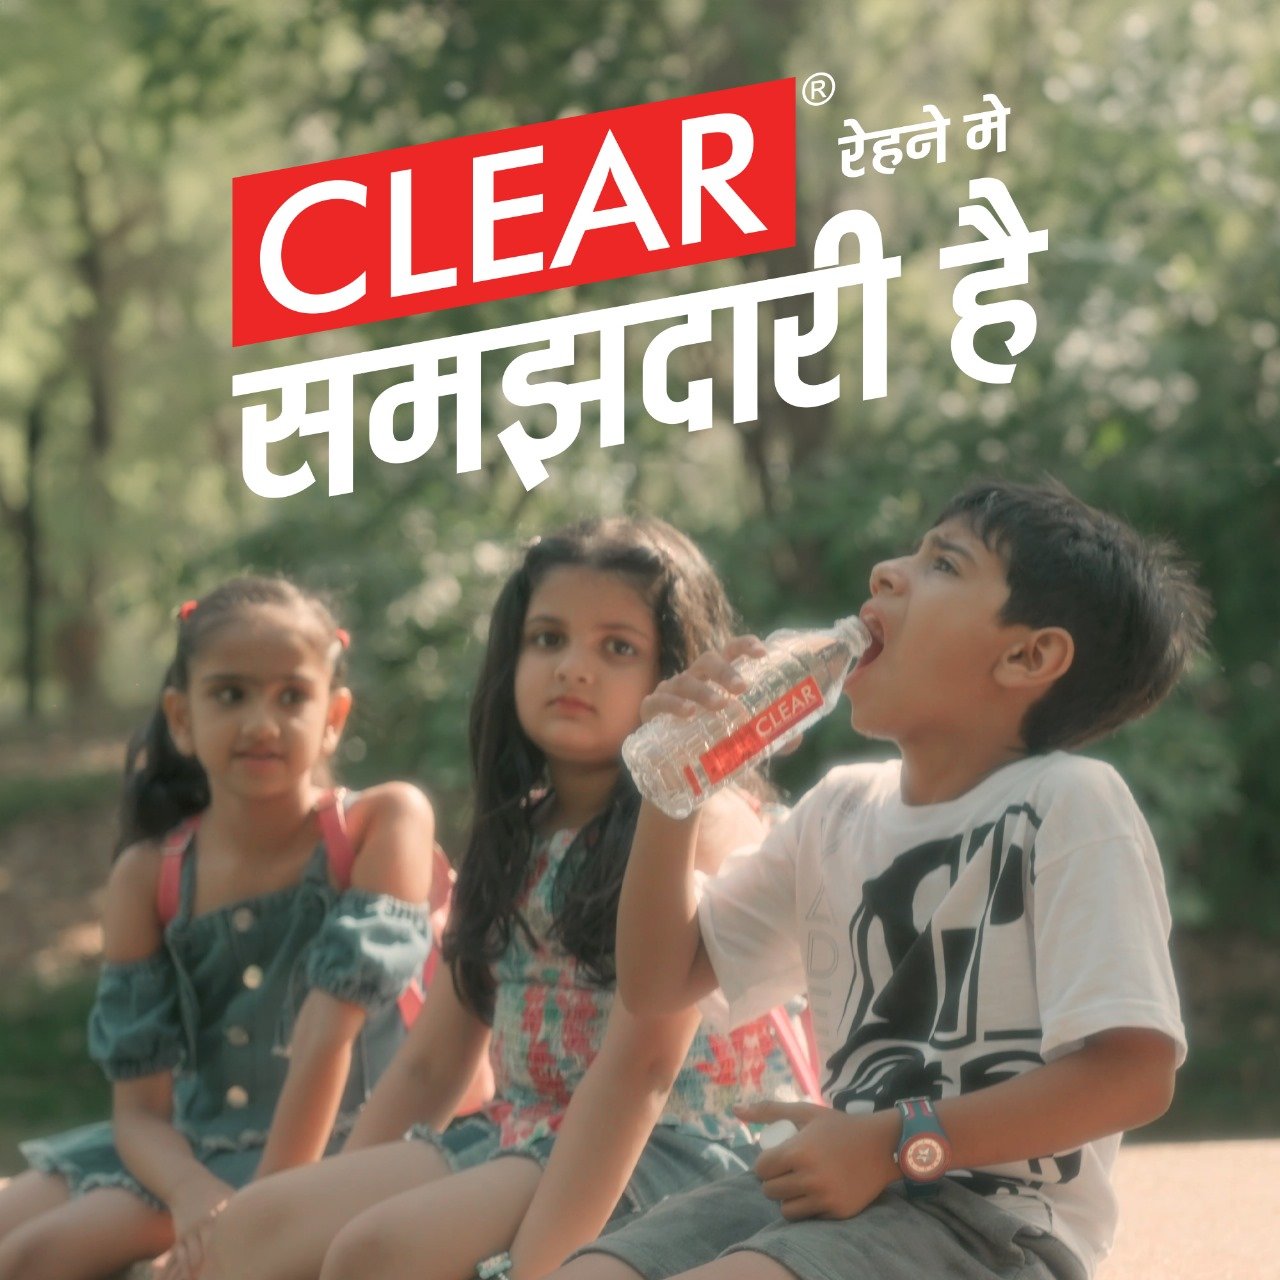 Clear Premium Water launches compelling new series